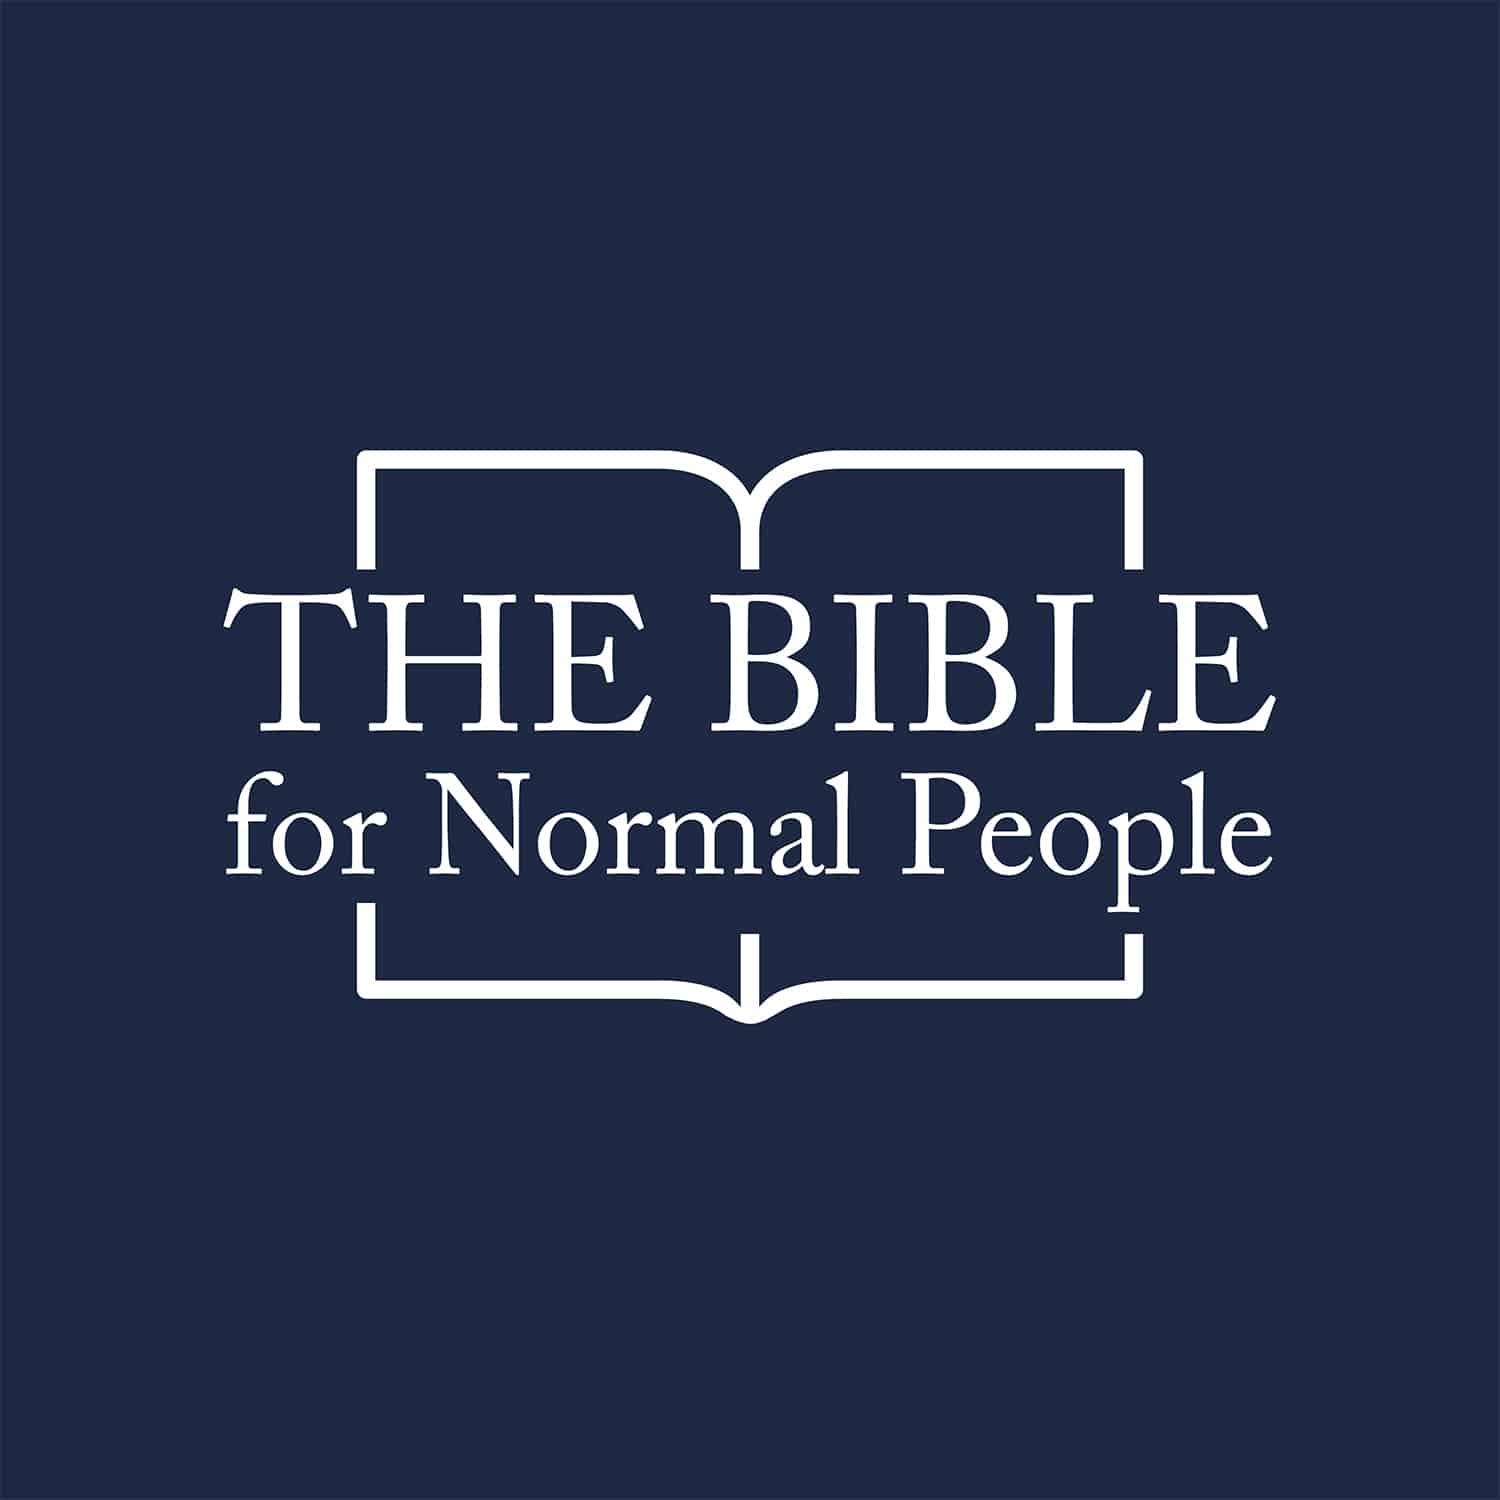 The Bible for Normal People Logo